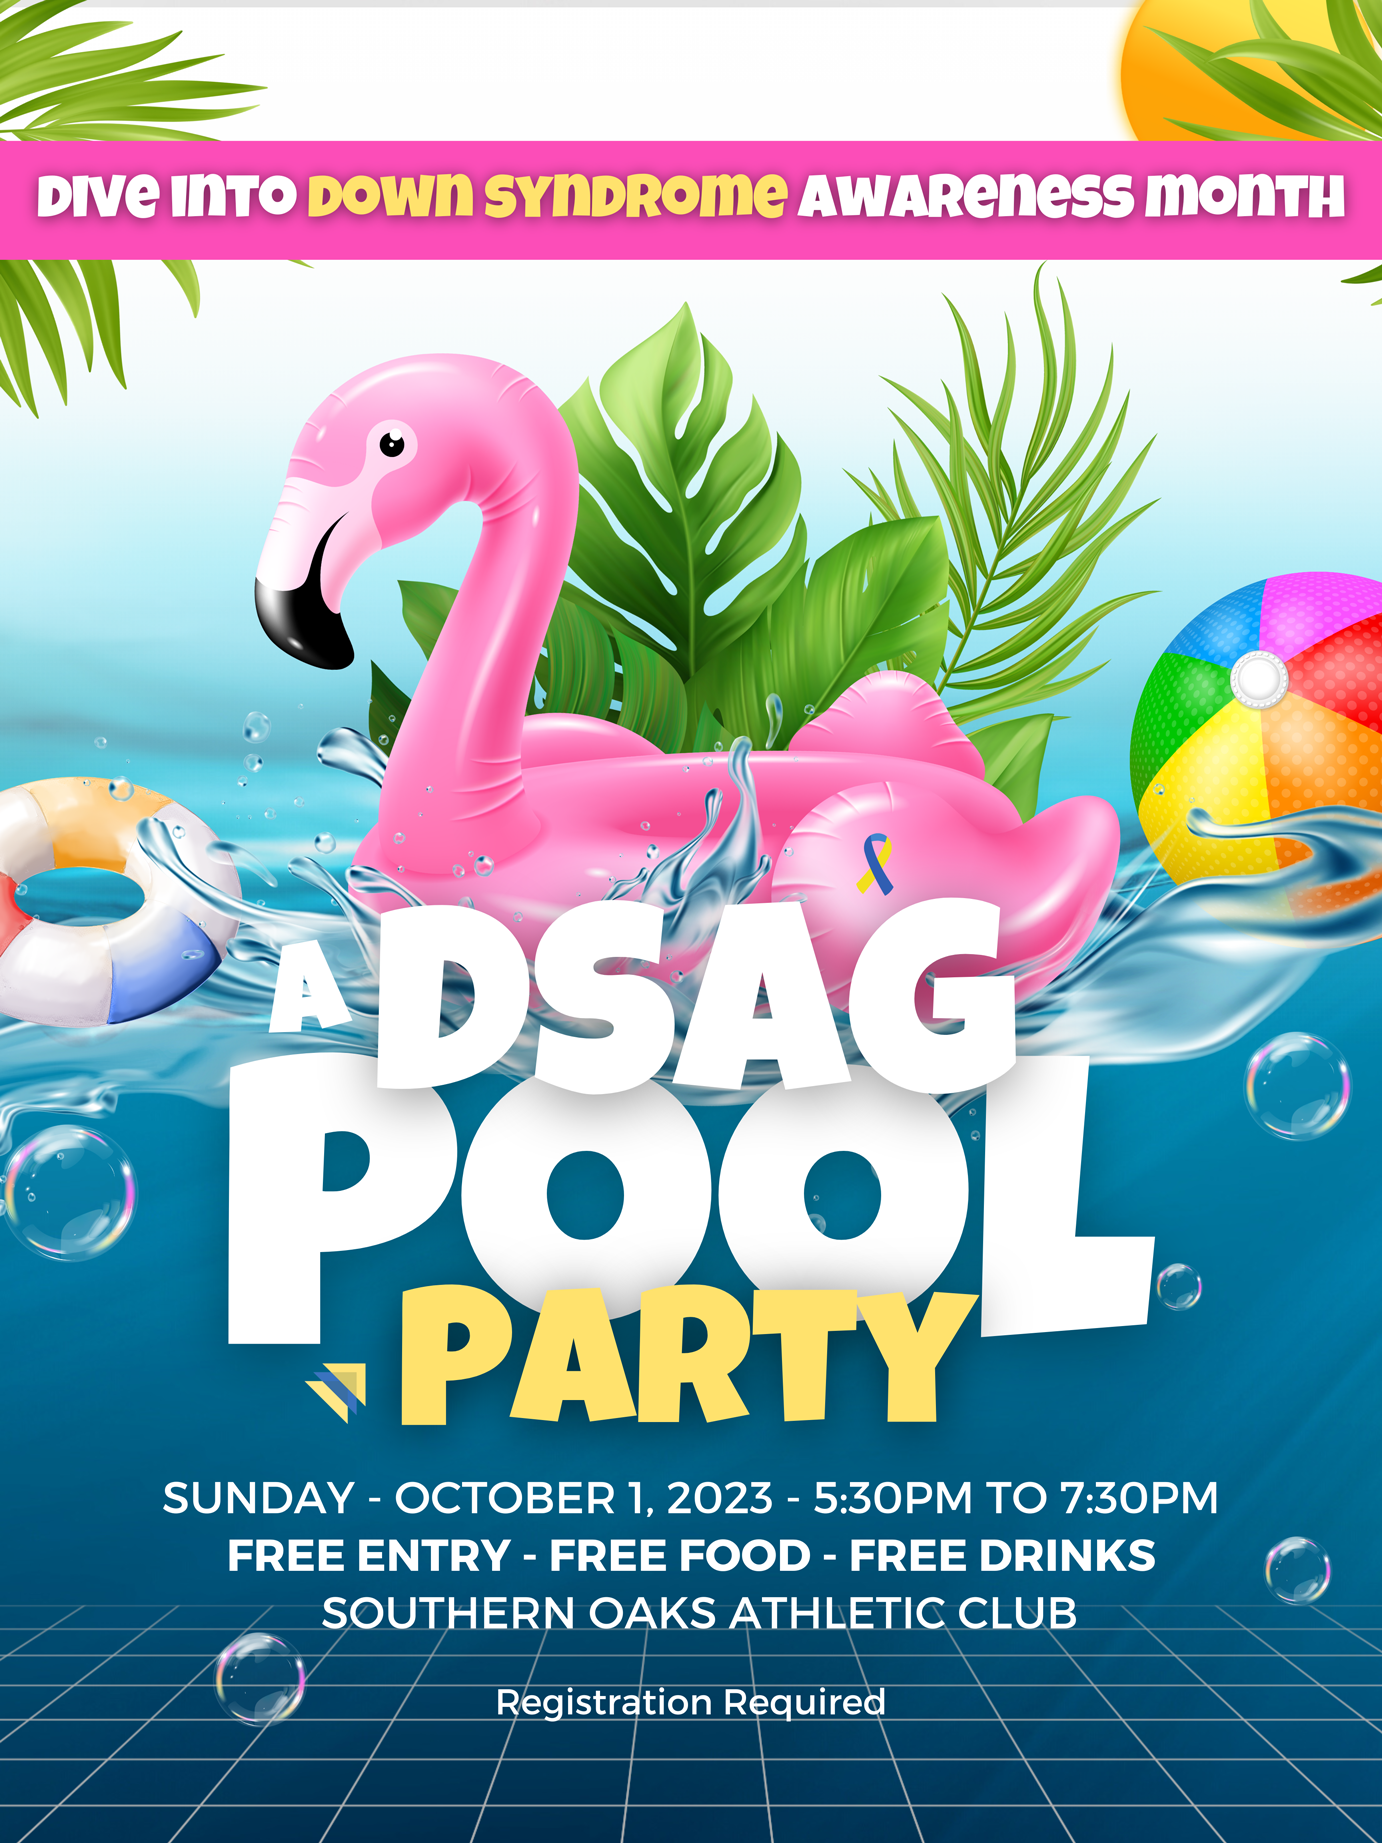 Image Text: Dive into down syndrome awareness month A DSAG POOL PARTY Sunday - October 1, 2023 - 5:30PM to 7:30PM FREE ENTRY - FREE FOOD - FREE DRINKS Southern Oaks Athletic Club Registration Required